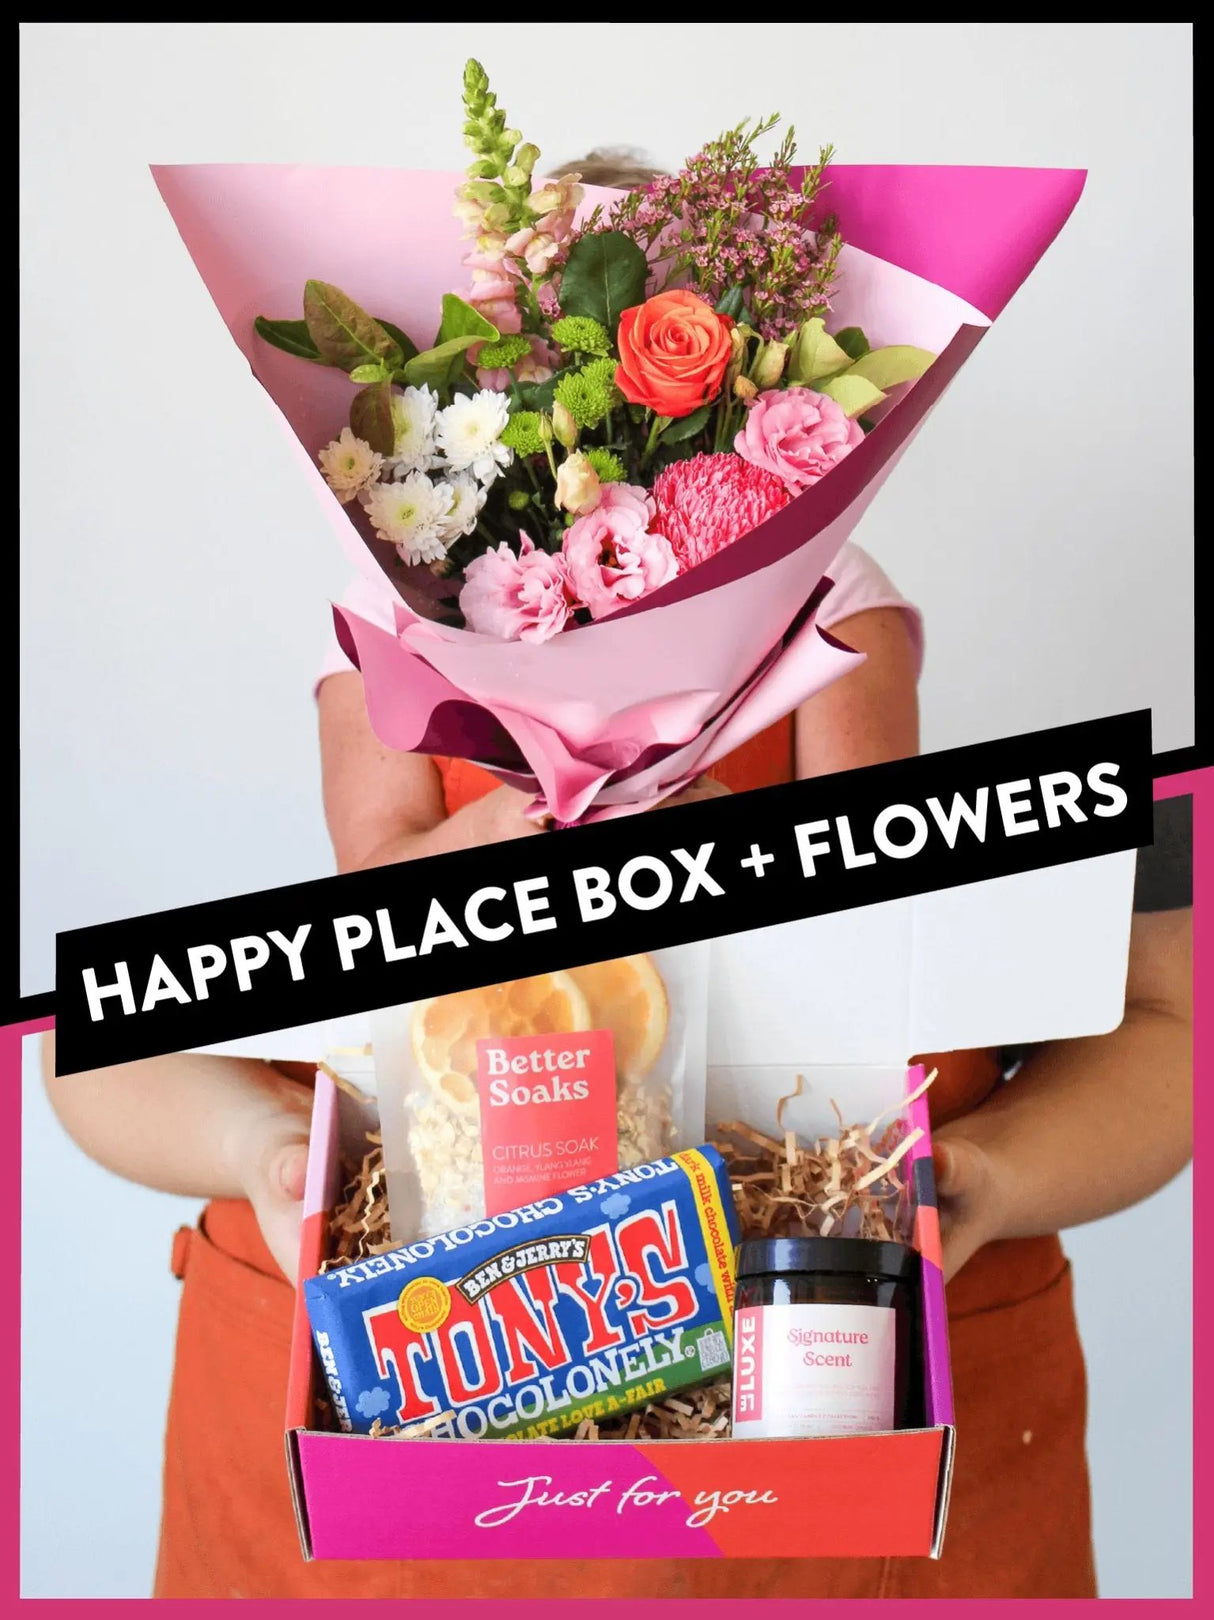 Happy Place Box + Flowers - The Posy Co